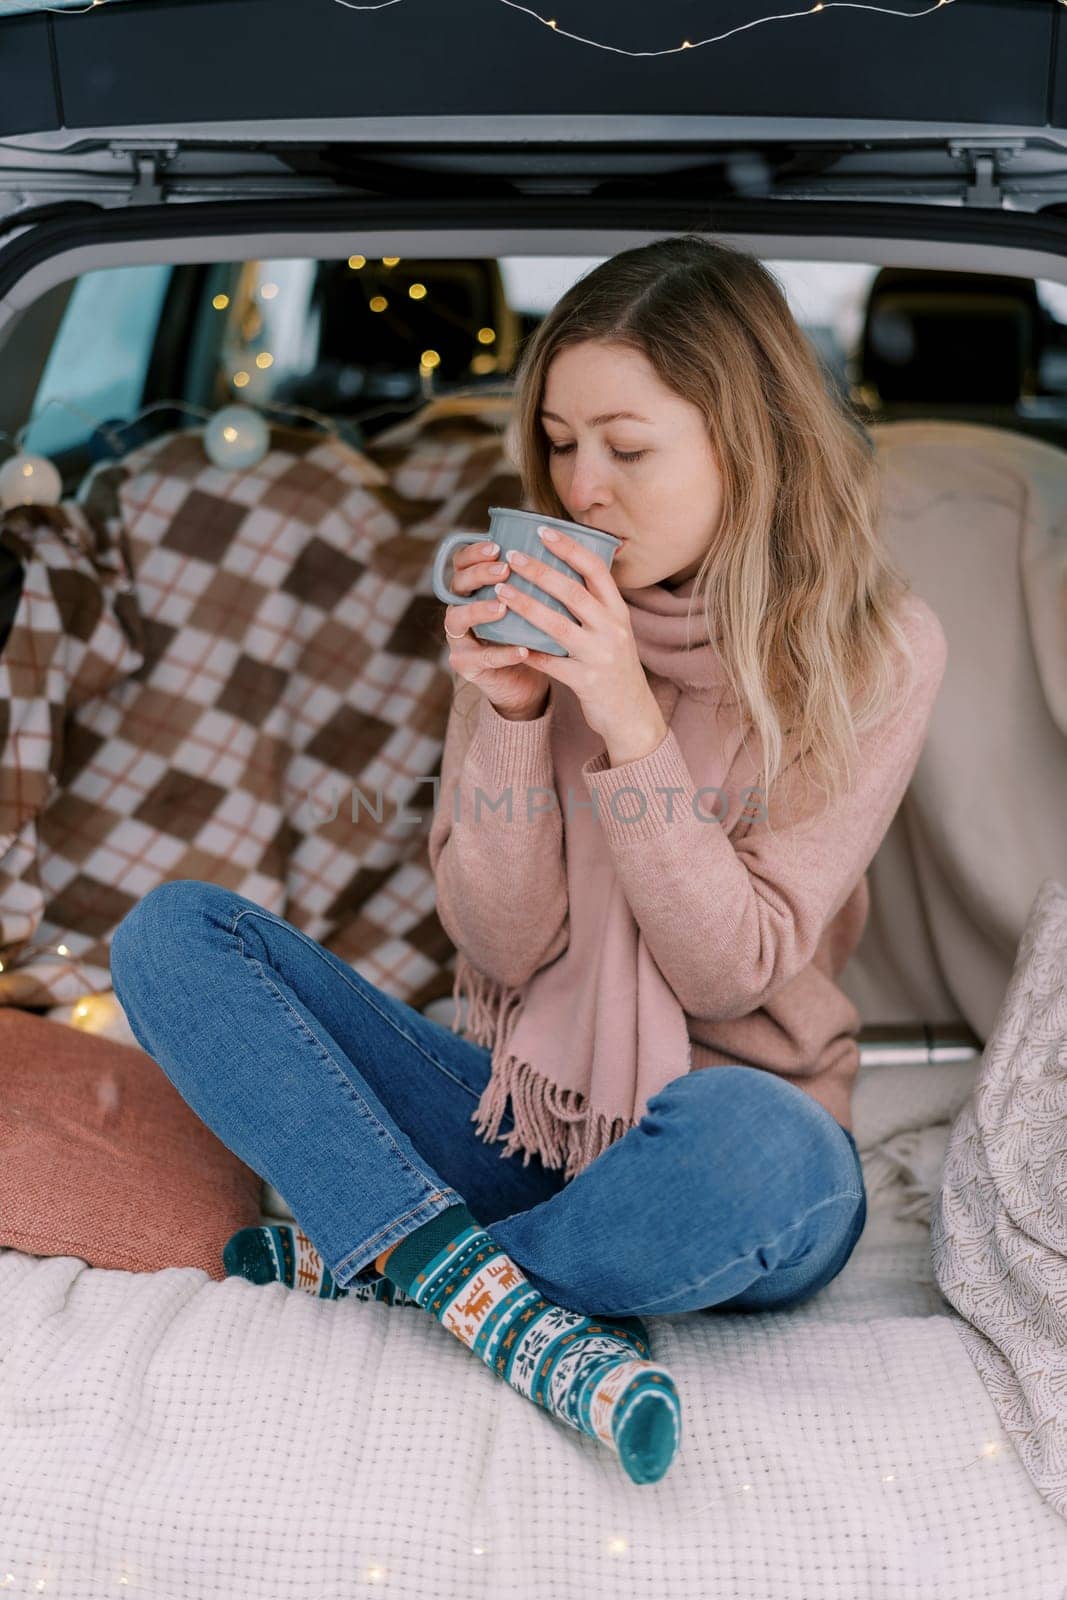 Girl sits cross-legged on a blanket in the trunk of a car and drinks coffee from a mug by Nadtochiy